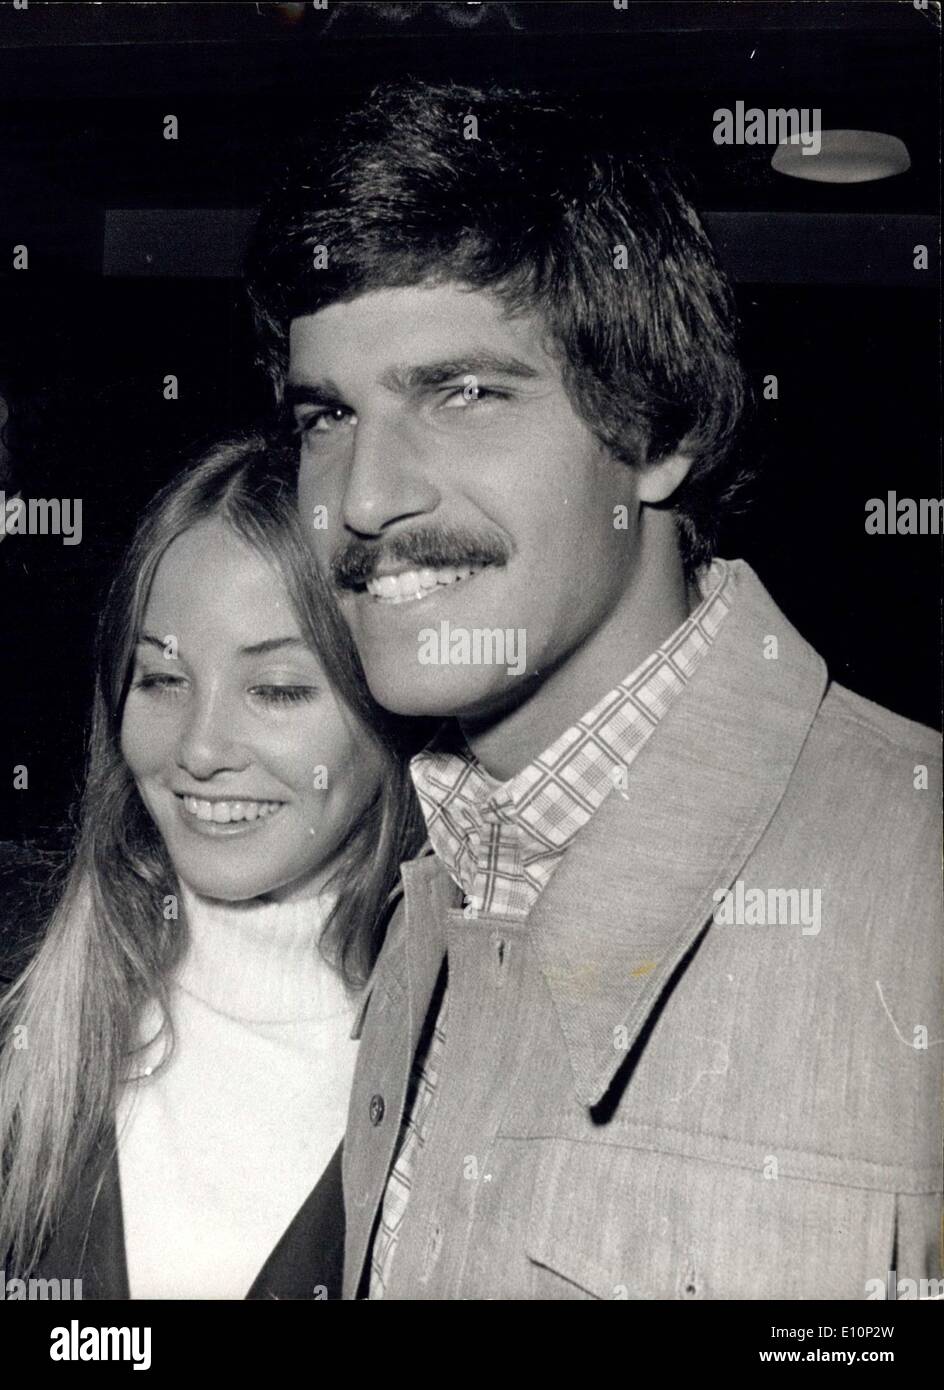 Nov. 09, 1973 - Mark Spitz visits London with his wife: Golden boy Mark Spitz, who won seven Olympic Gold Medals at Munich, wants to try again, as a yachtsman. But Mark, aged 23, who was accompanied by his wife Susan on a visit to London yesterday, is barred because of his TV earnings since the Games. Photo shows Mark Spitz, the American swimming ace, pictured with his wife Susan when they arrived in London yesterday. Stock Photo